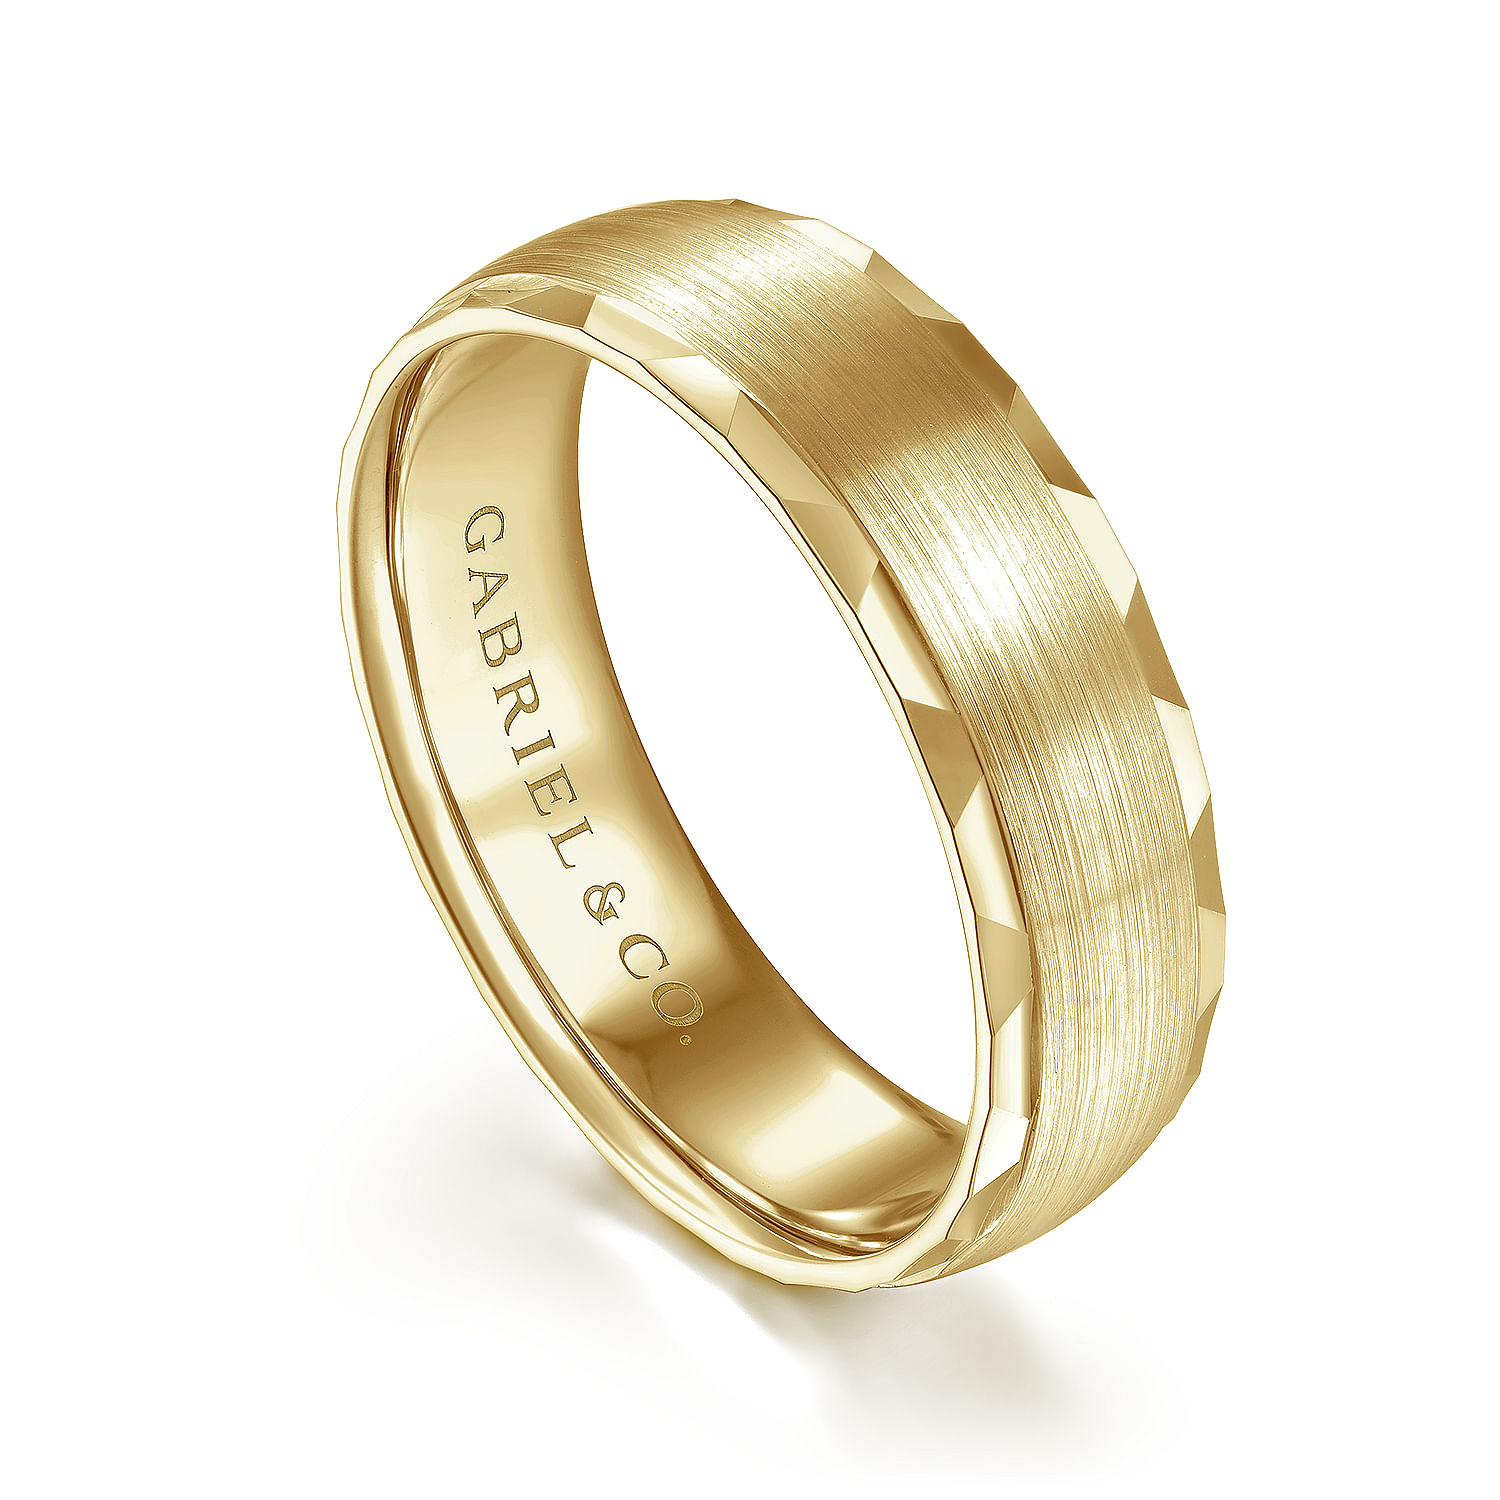 14K Yellow Gold 6mm - Satin Finish Men's Wedding Band with Carved Edge